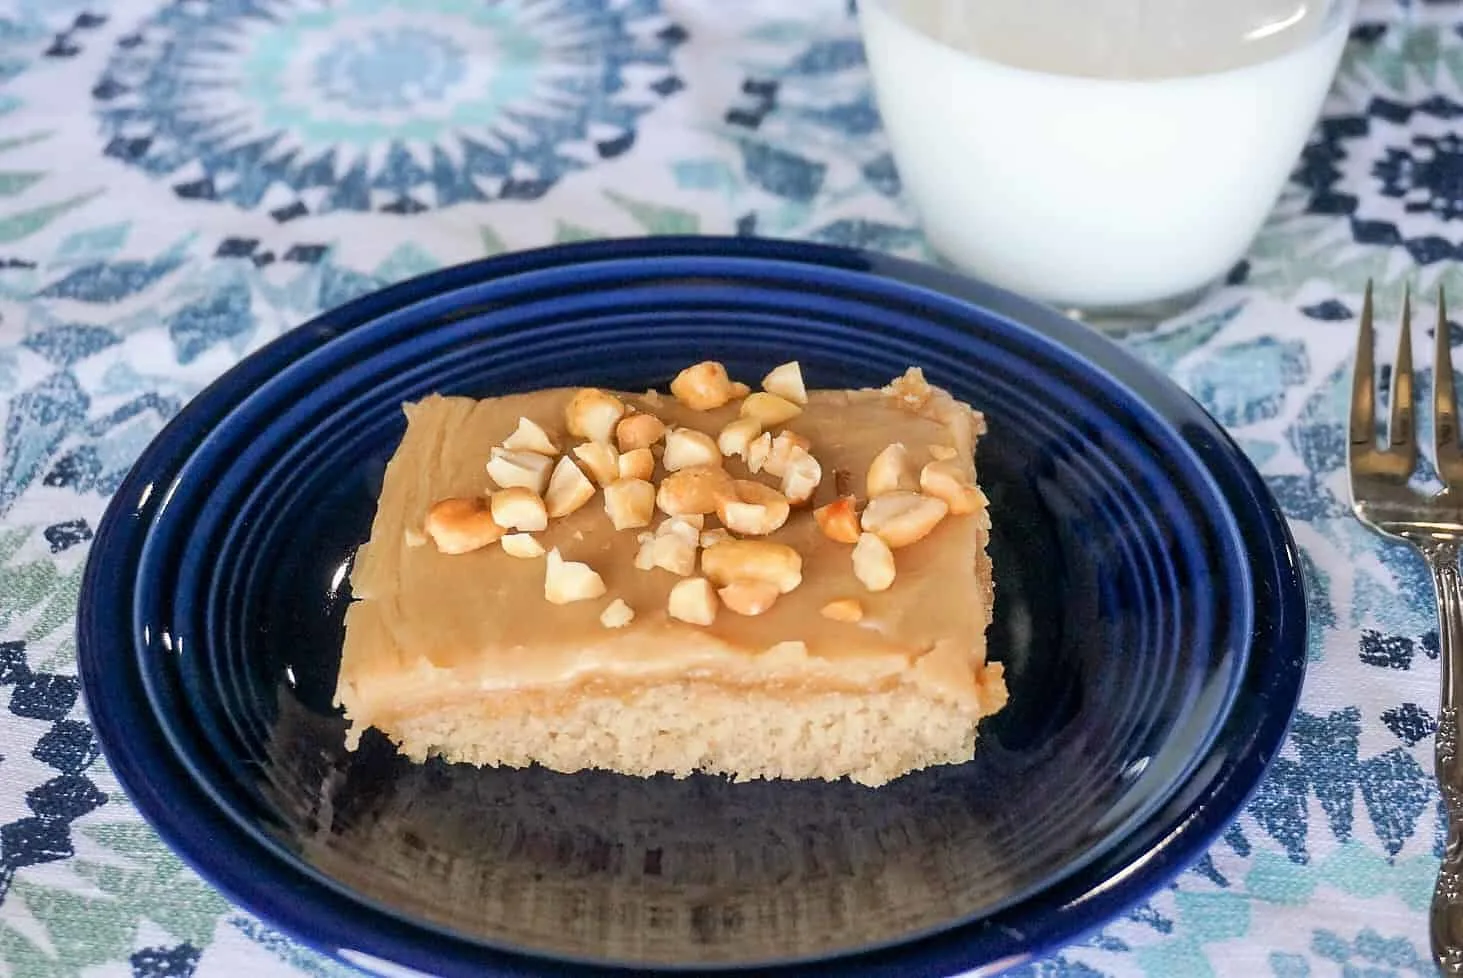 Peanut Butter Sheet Cake Topped with Peanuts